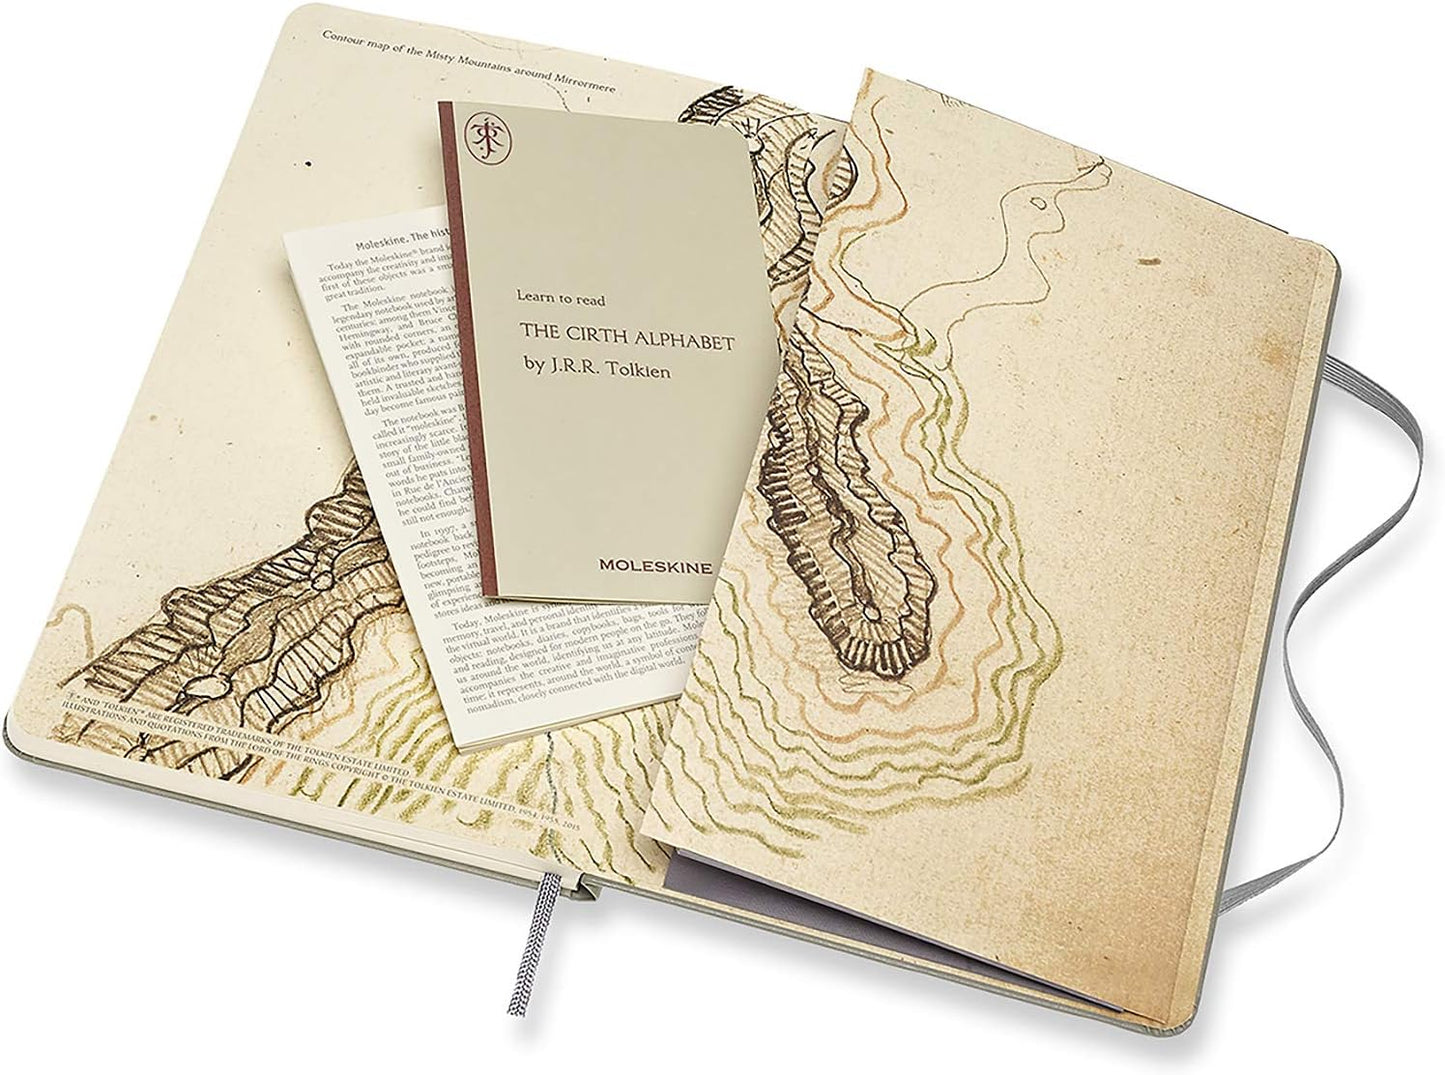 Moleskine Limited Edition Lord Of The Rings Notebook, Hard Cover, Large (5" x 8.25") Ruled/Lined, Black, 240 Pages - Grierson Studio